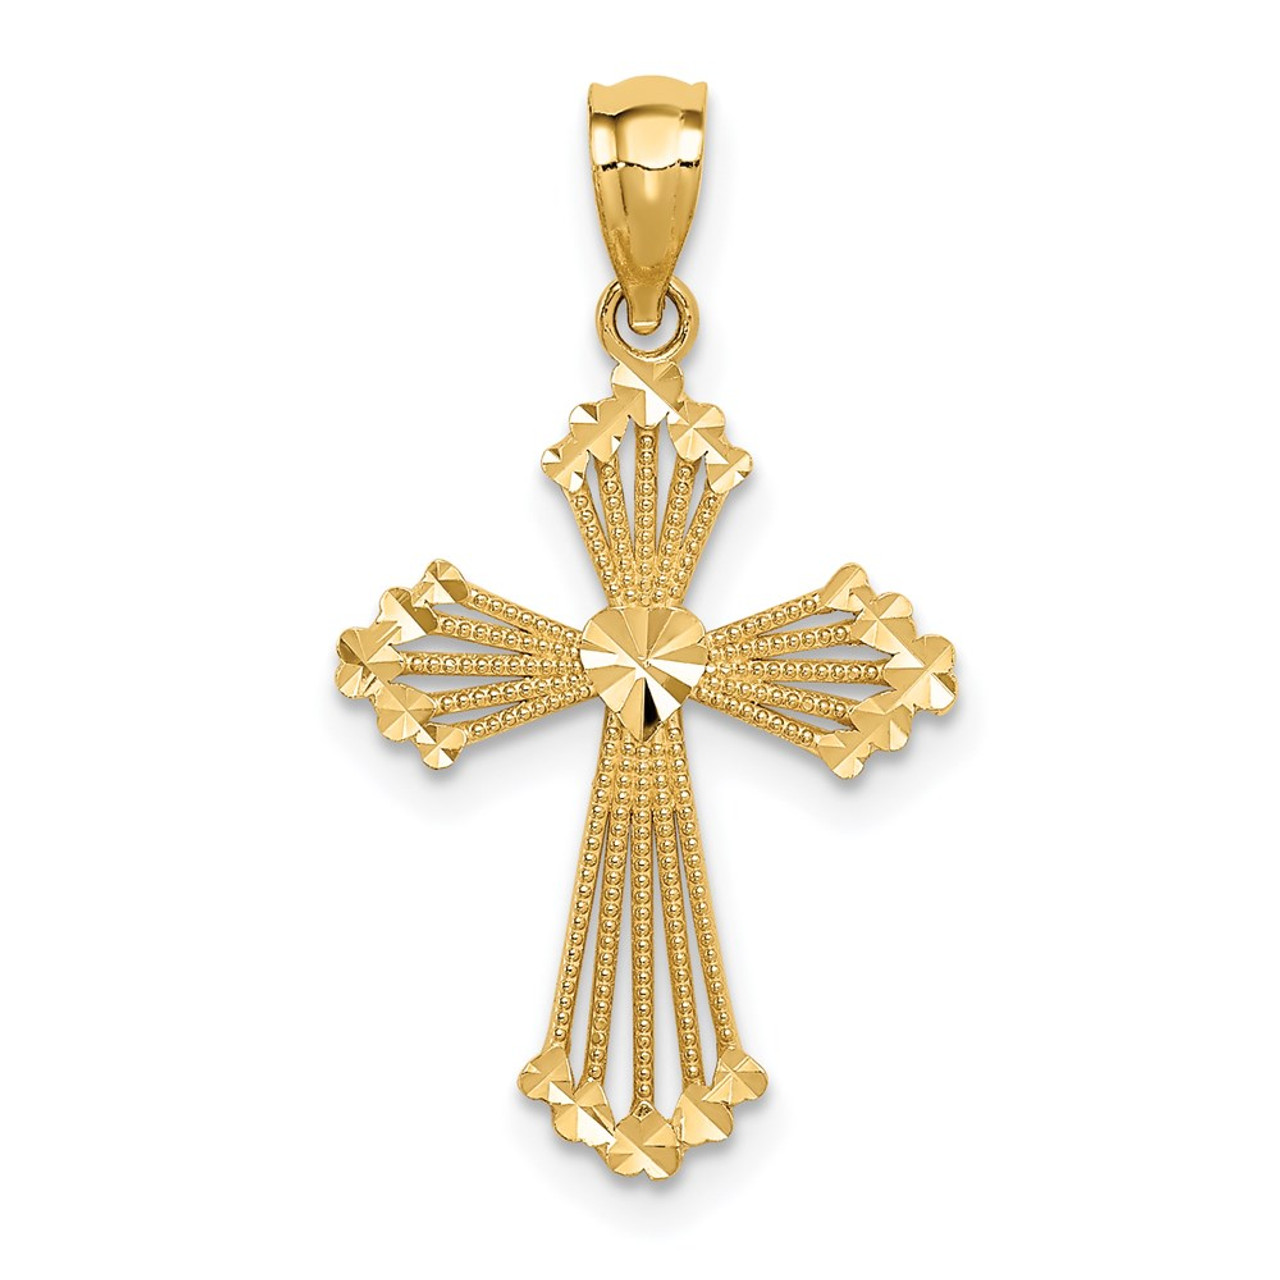 14K Yellow Gold Passion Cross Pendant 27mm length - (A97-937